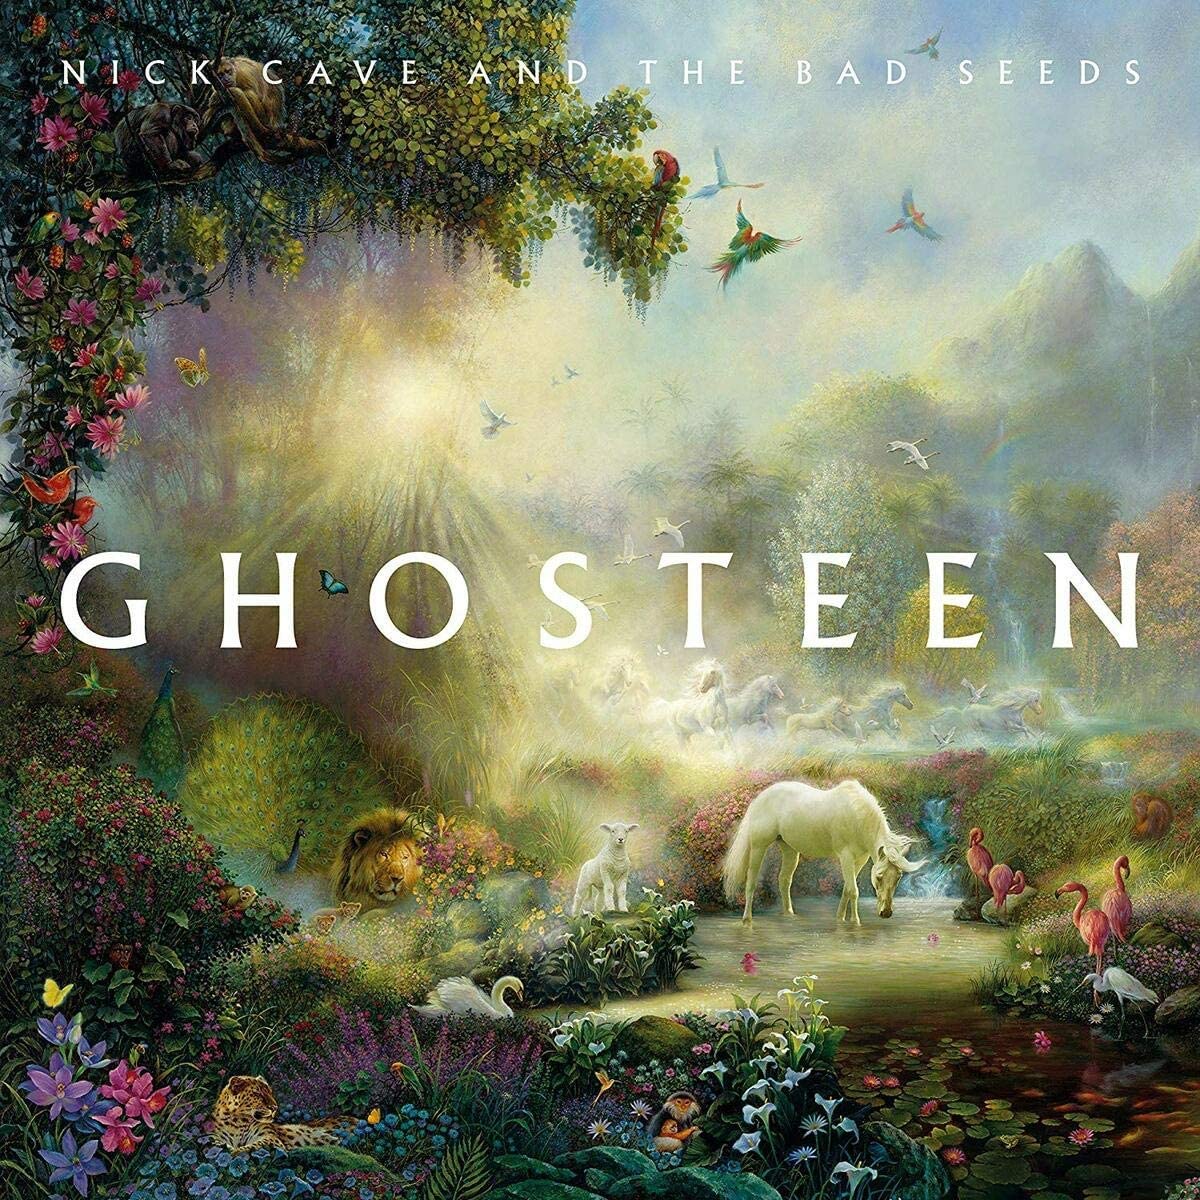 Ghosteen is the seventeenth studio album on vinyl from Nick Cave and The Bad Seeds, following 2016's Skeleton Tree.